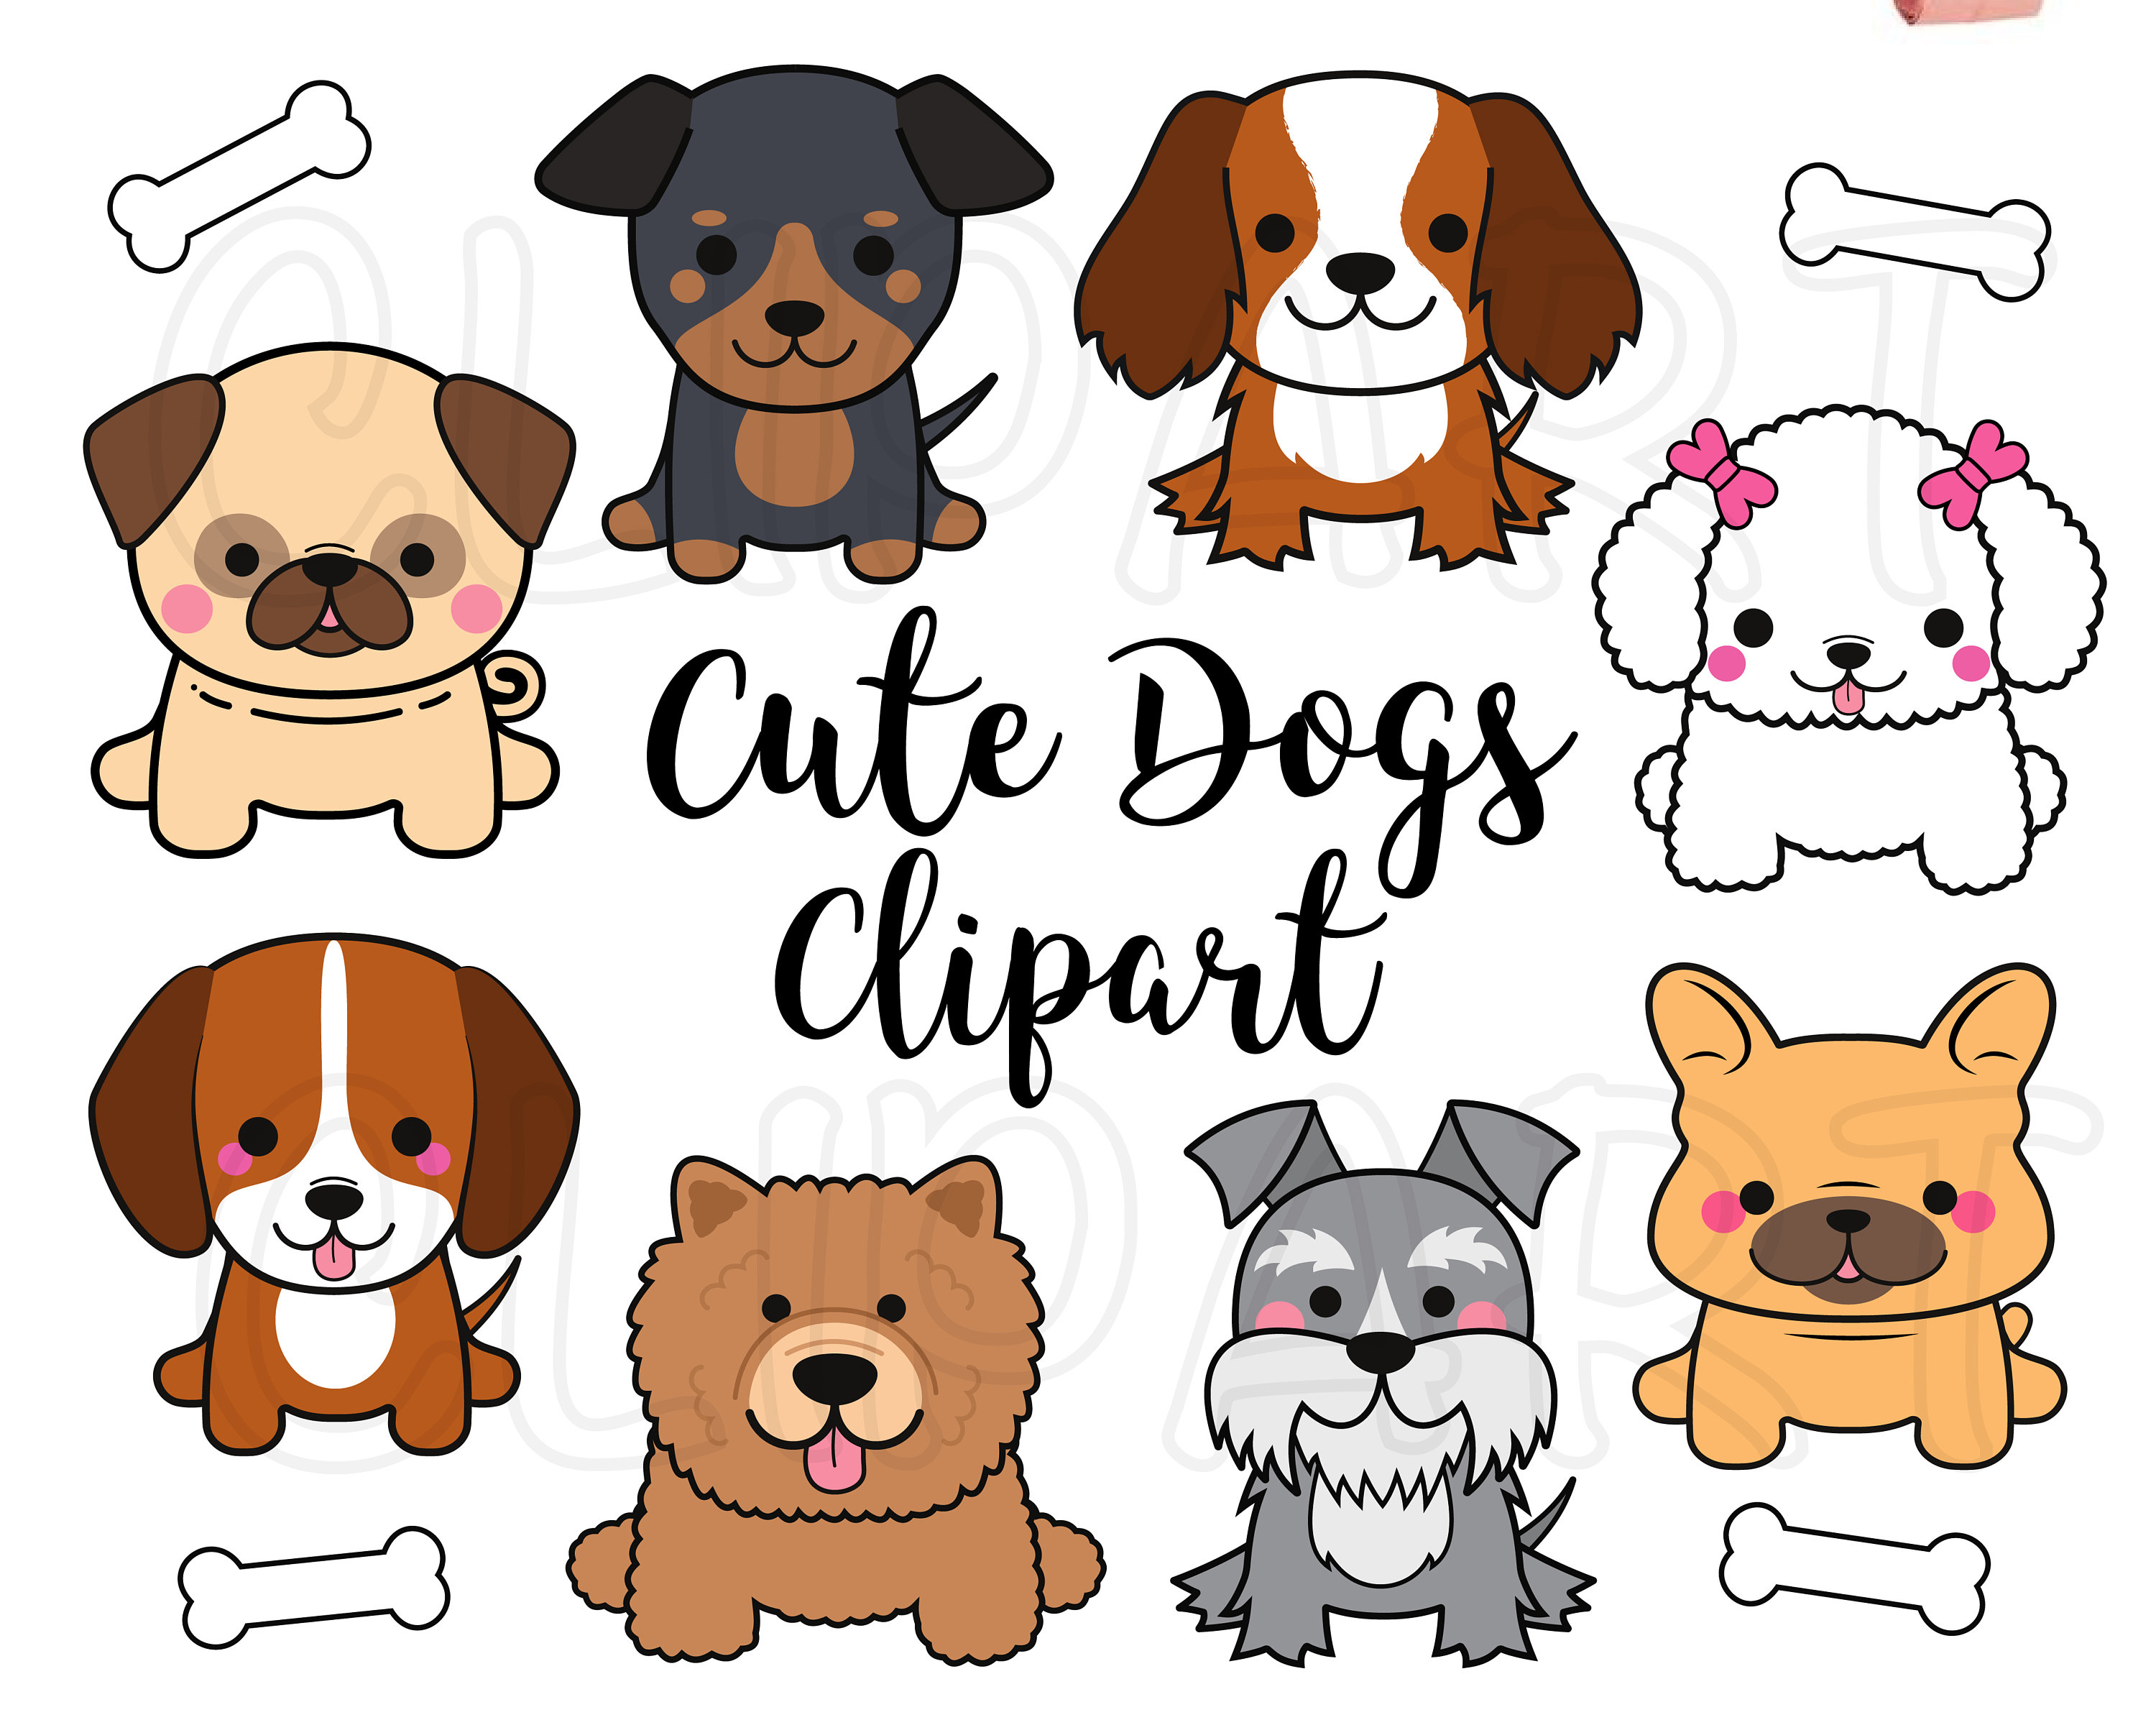 Dog Breeds Clipart Cute Dogs Clip Art Graphic By Inkley Studio ...